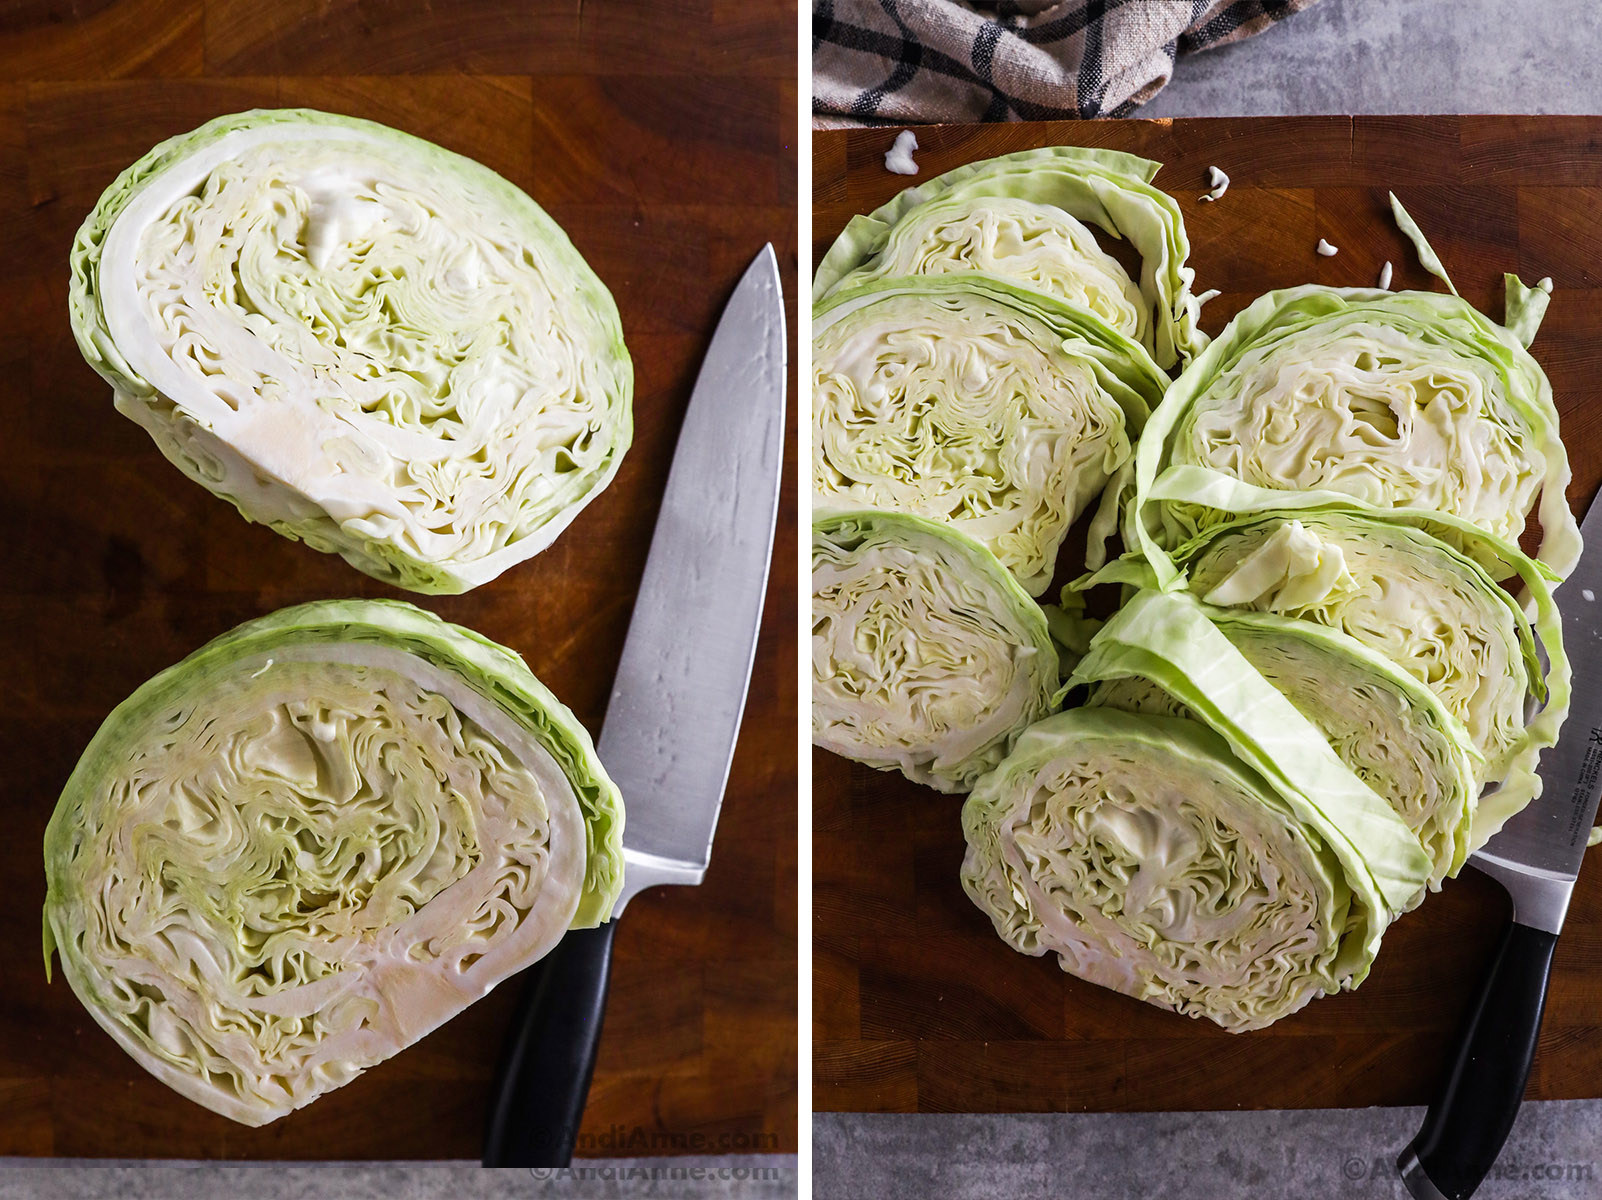 Slices of green cabbage with a knife on a cutting board.